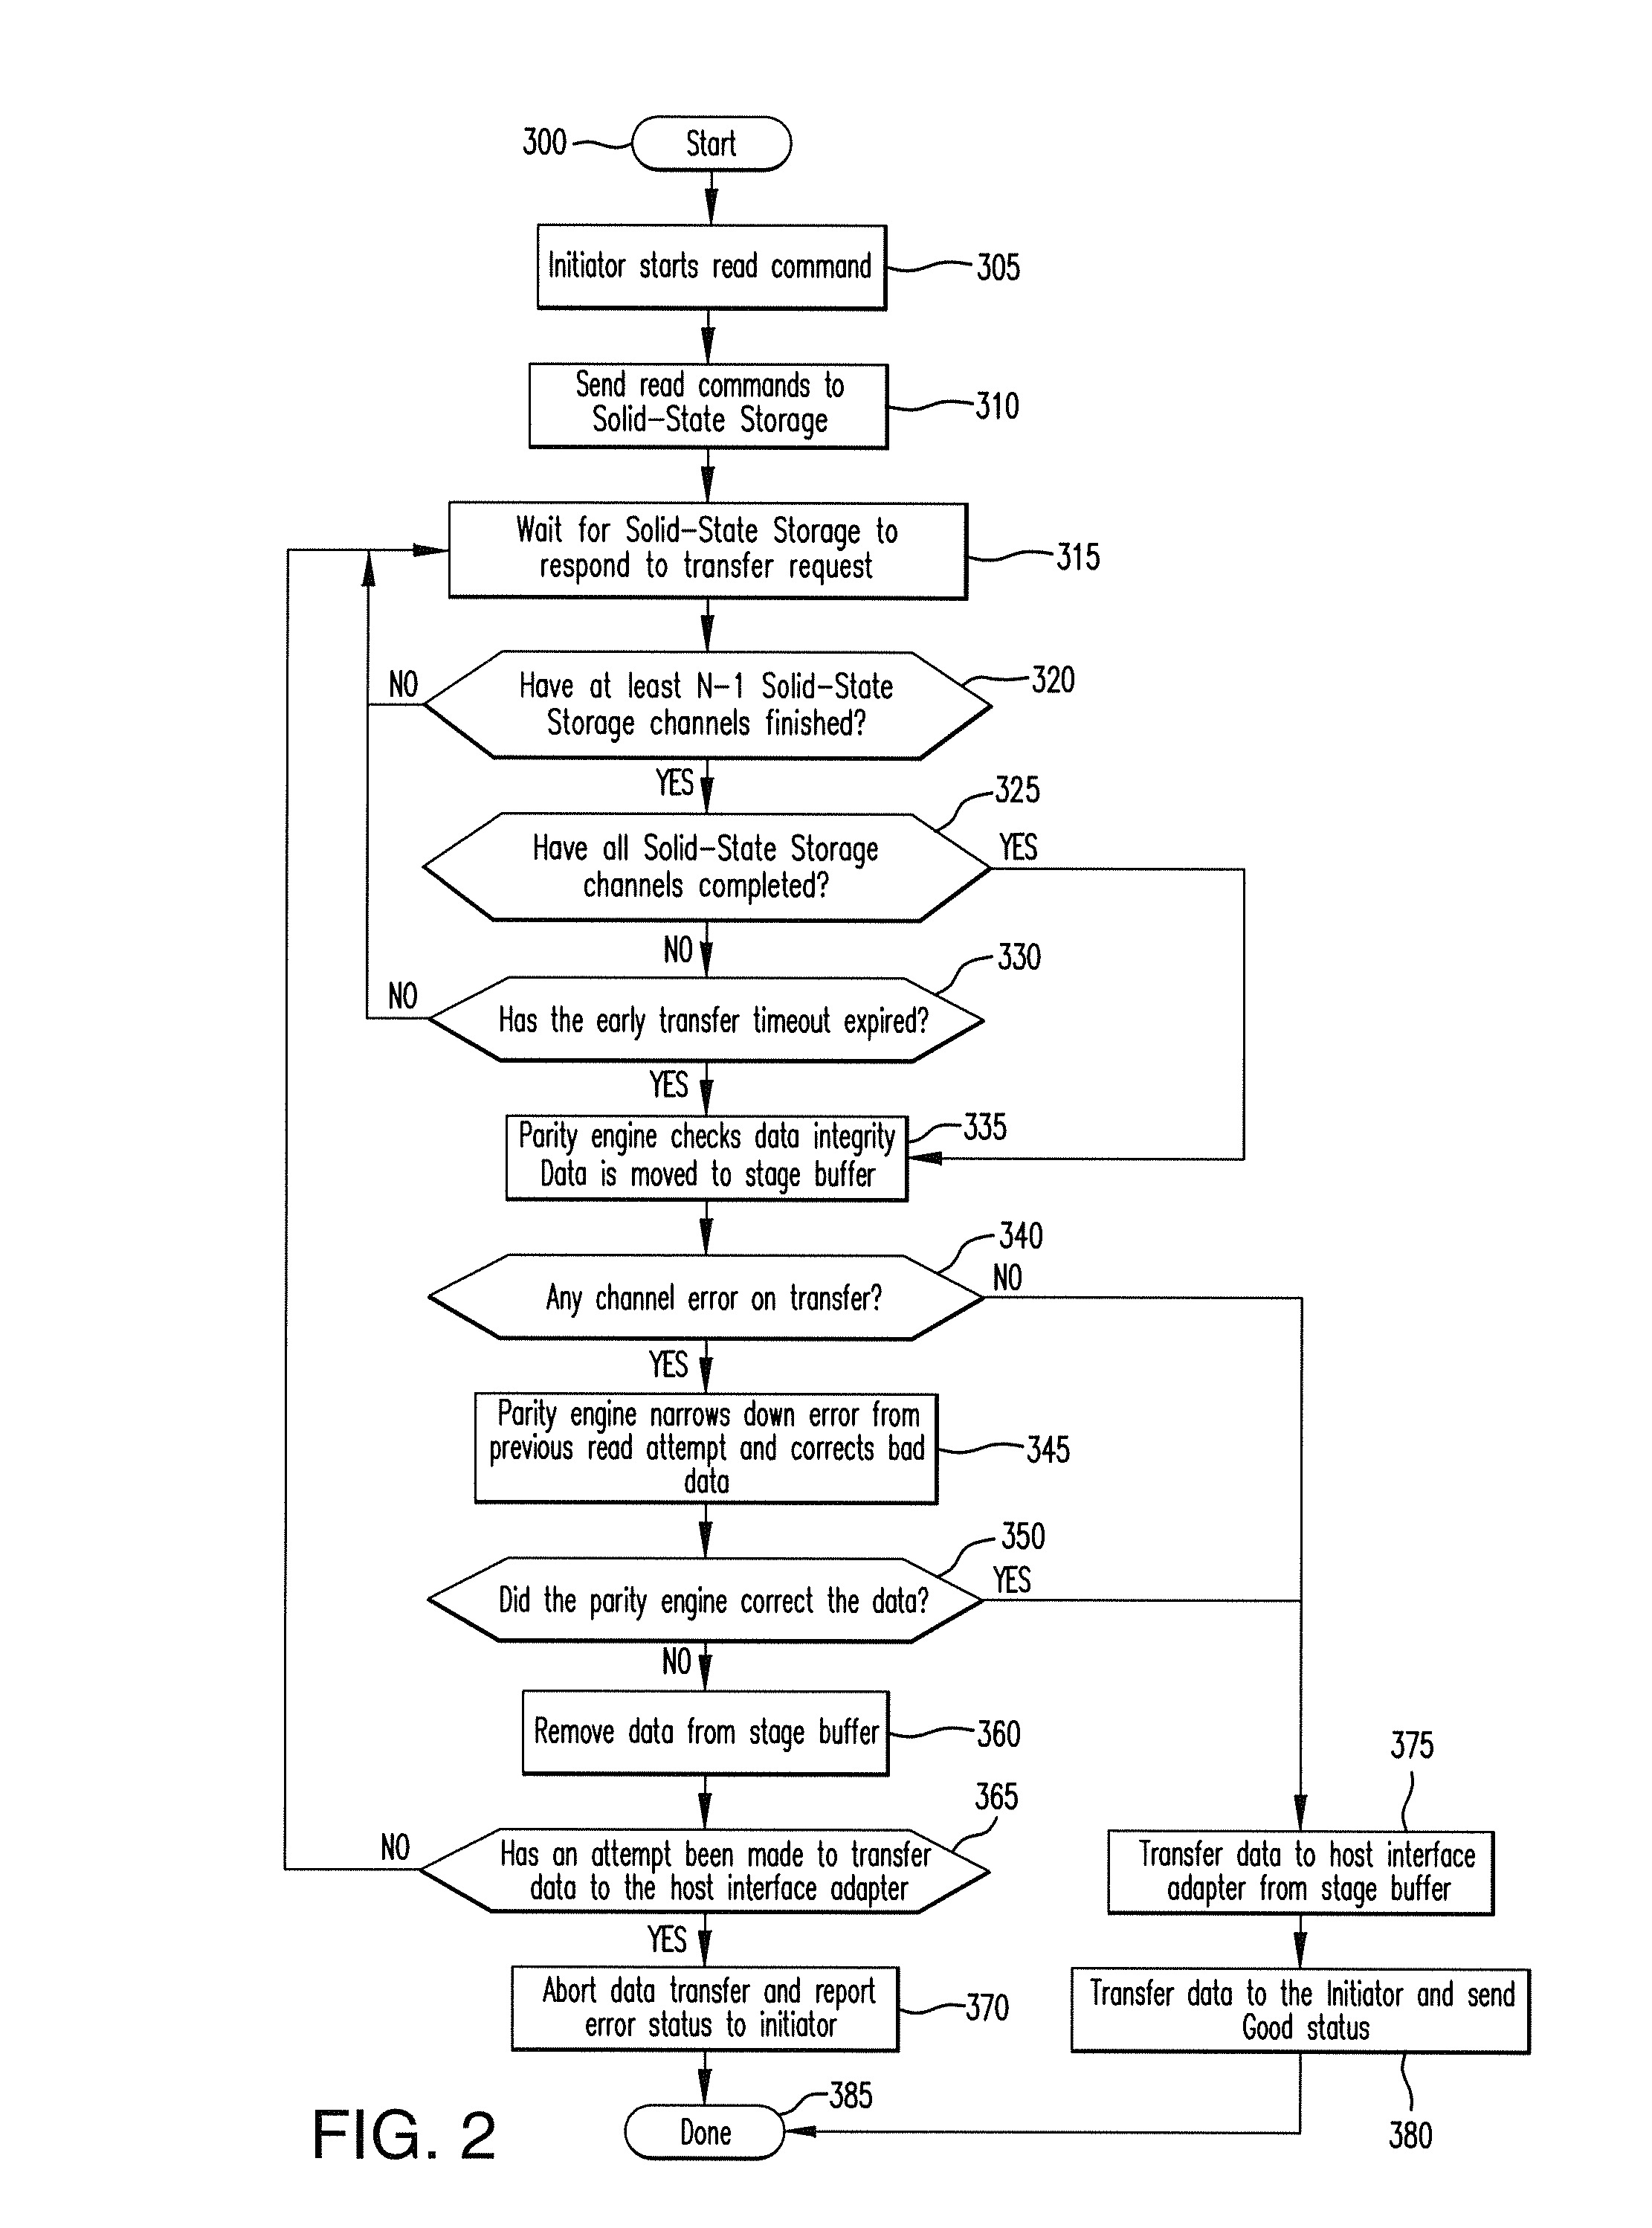 Method for reducing latency in a solid-state memory system while maintaining data integrity